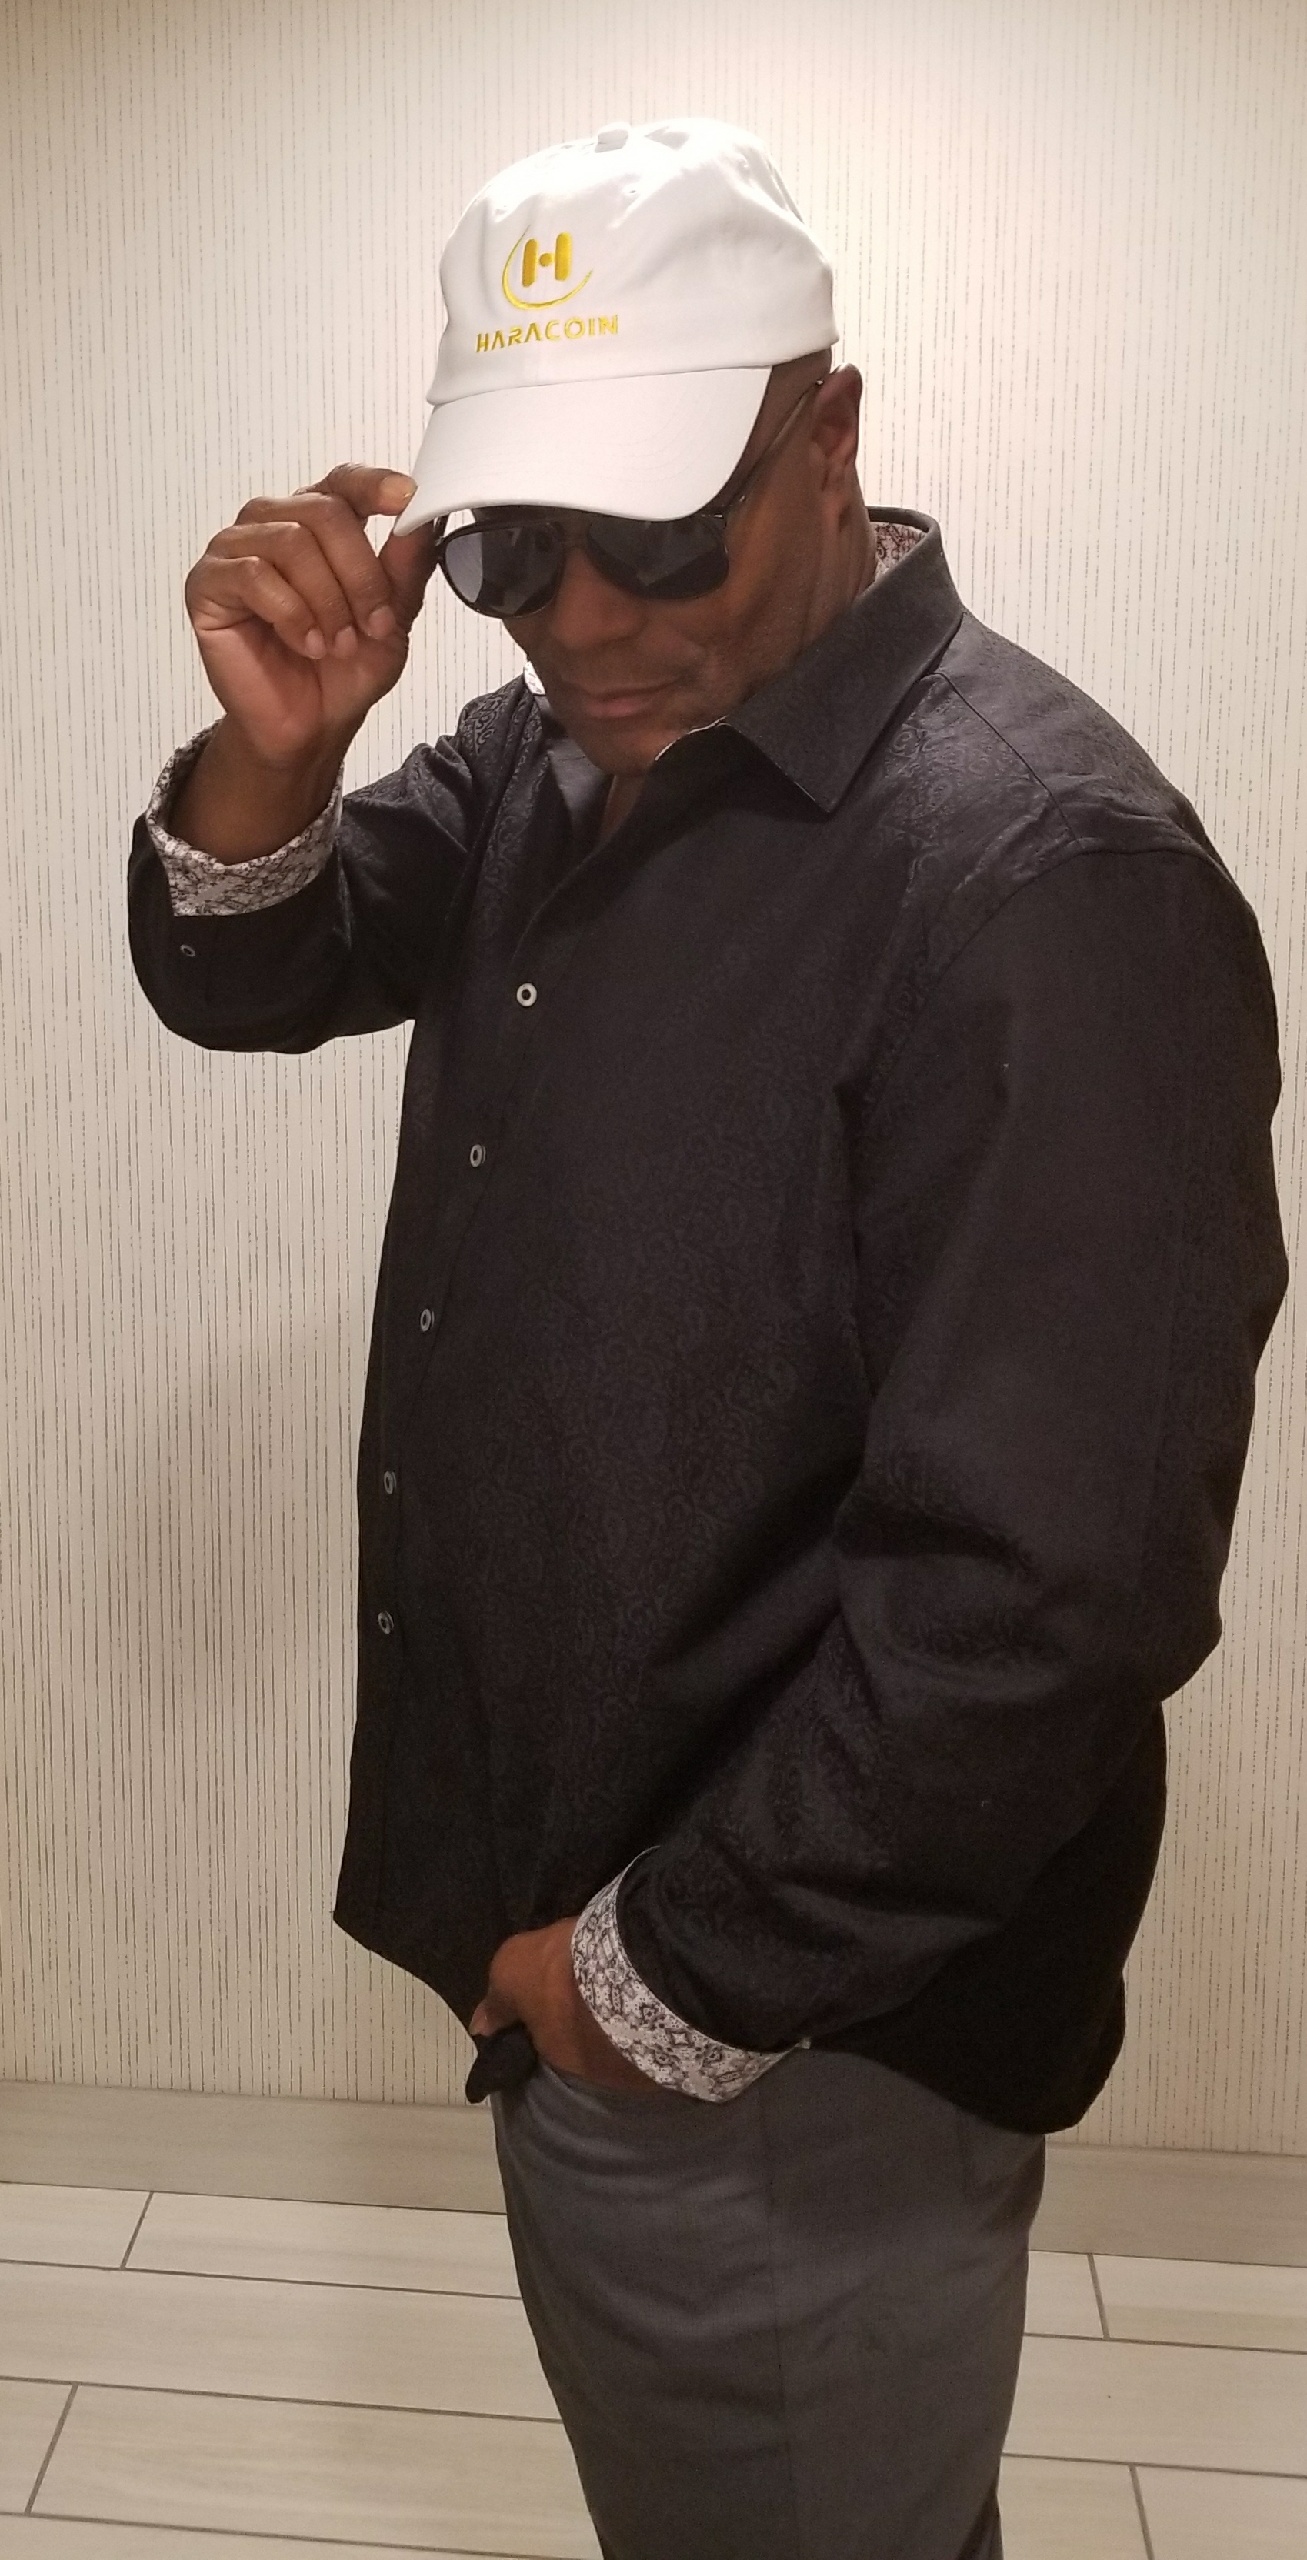 Willie Stewart, Manager for 3Dimensional sports a Haracoin lid in celebration of a successful 3Dimensional performance during the 2018 Sundance Film Festival